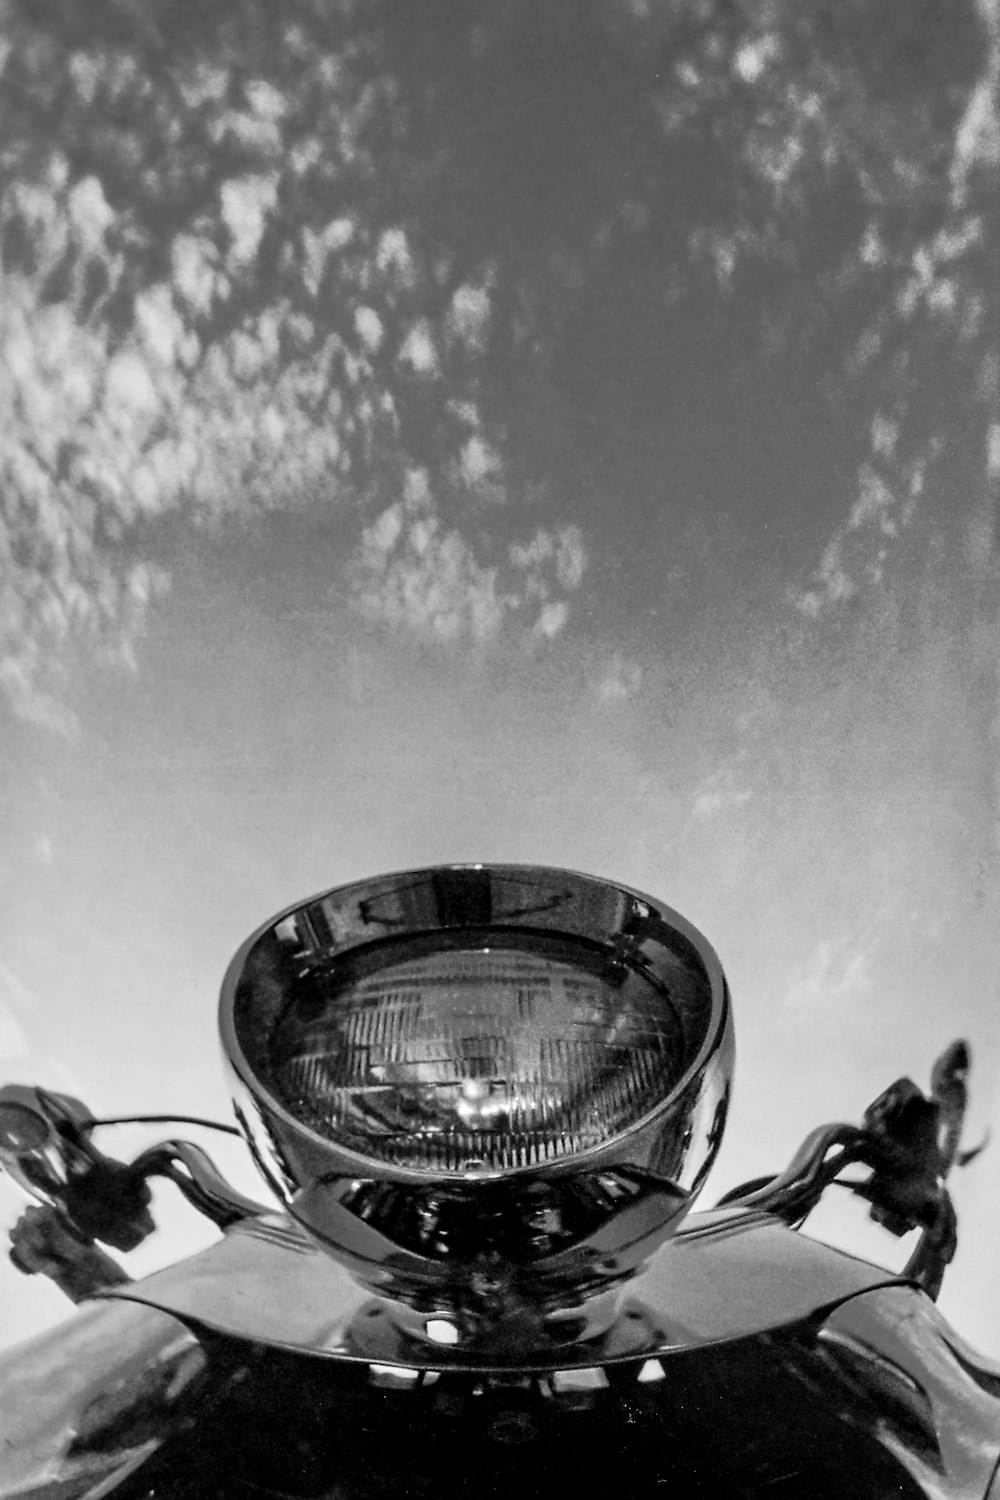 grayscale photo of motorcycle with light